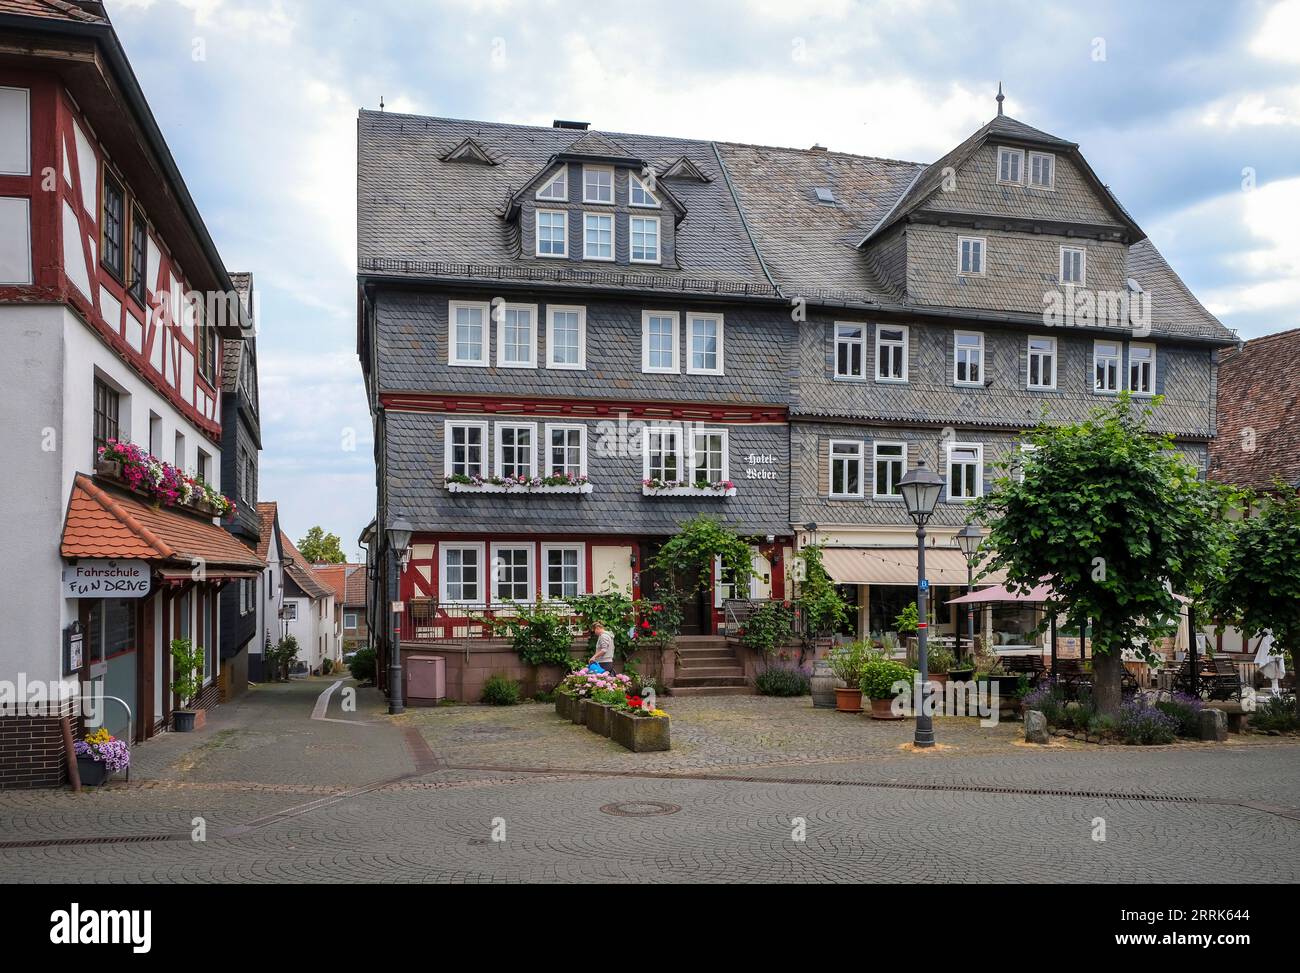 Amöneburg, Hesse, Germany - Old Town. Hotel Weber at the historical market place. Amöneburg is a small town in the central Hessian district of Marburg-Biedenkopf. It is located on the 365 m high mountain Amöneburg with the castle Amöneburg at the top. Stock Photo